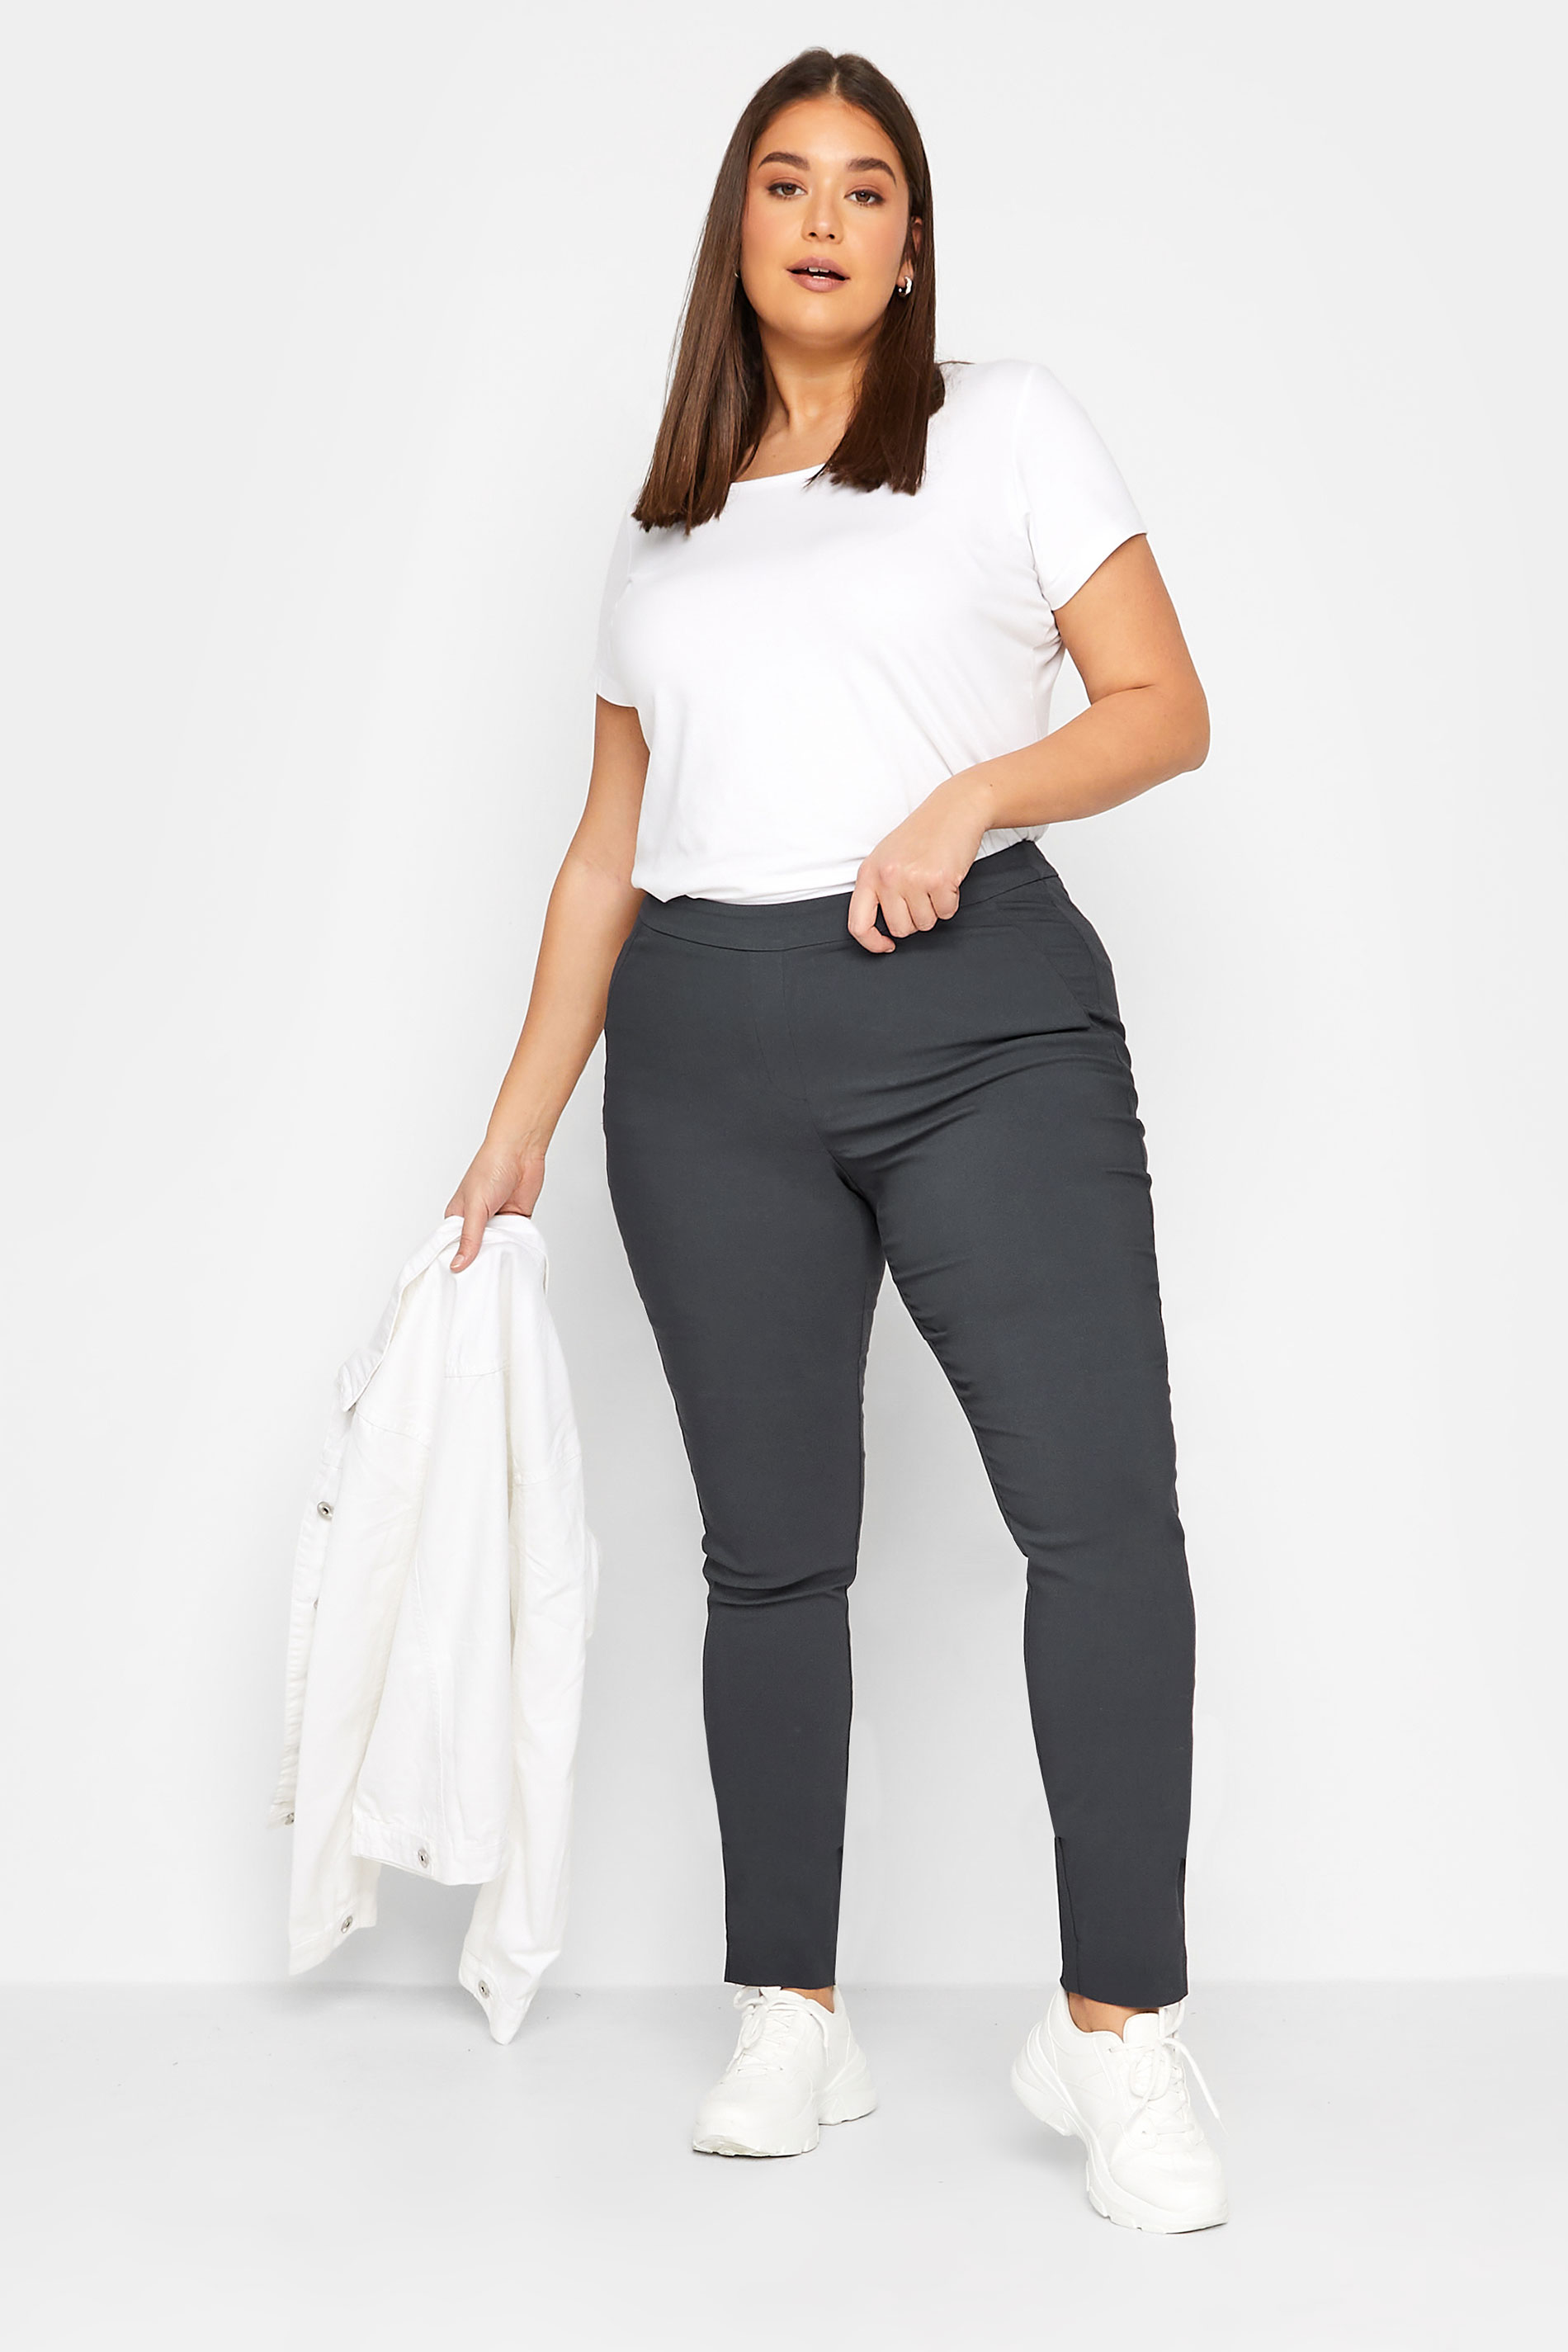 LTS Tall Women's Grey Skinny Fit Trousers | Long Tall Sally 2